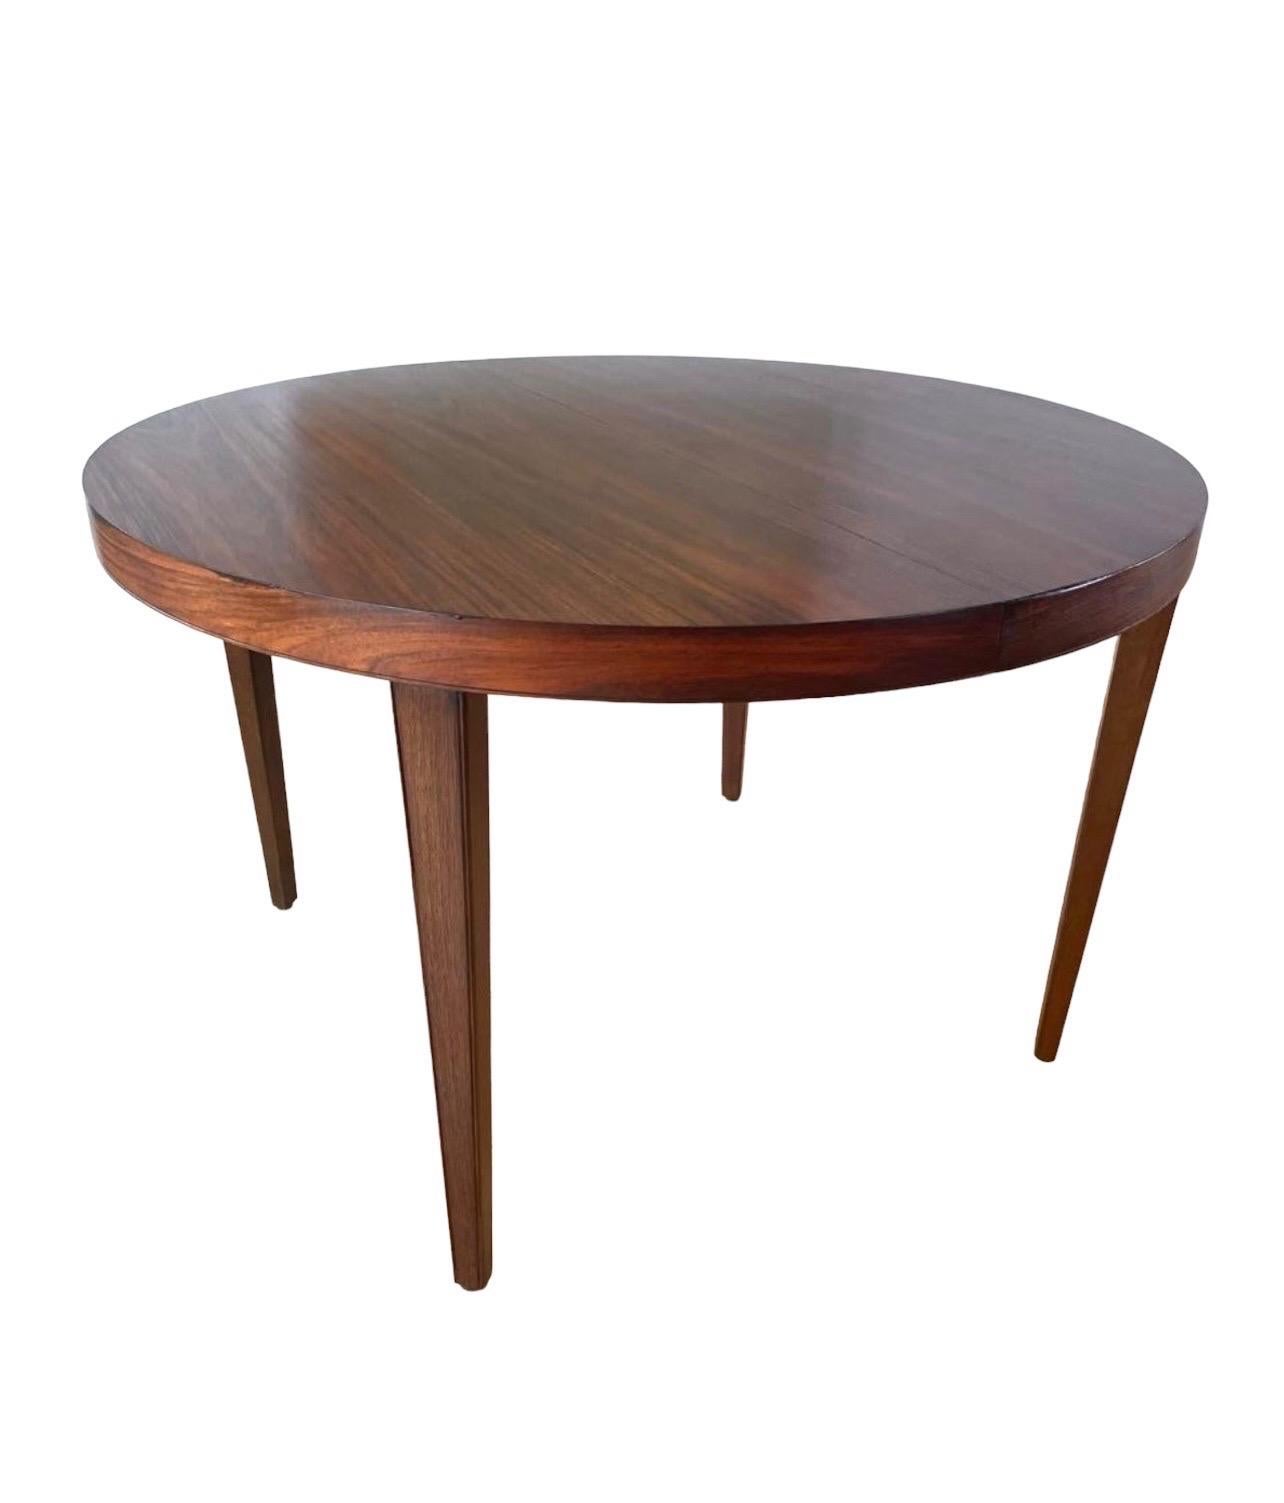 This exceptional rosewood dining table from Denmark is in near perfect condition. This table can be round for smaller areas or oval to seat more. Comes with one leaf. Stunning wood grain and original finish. One end of the table has a darkened spot